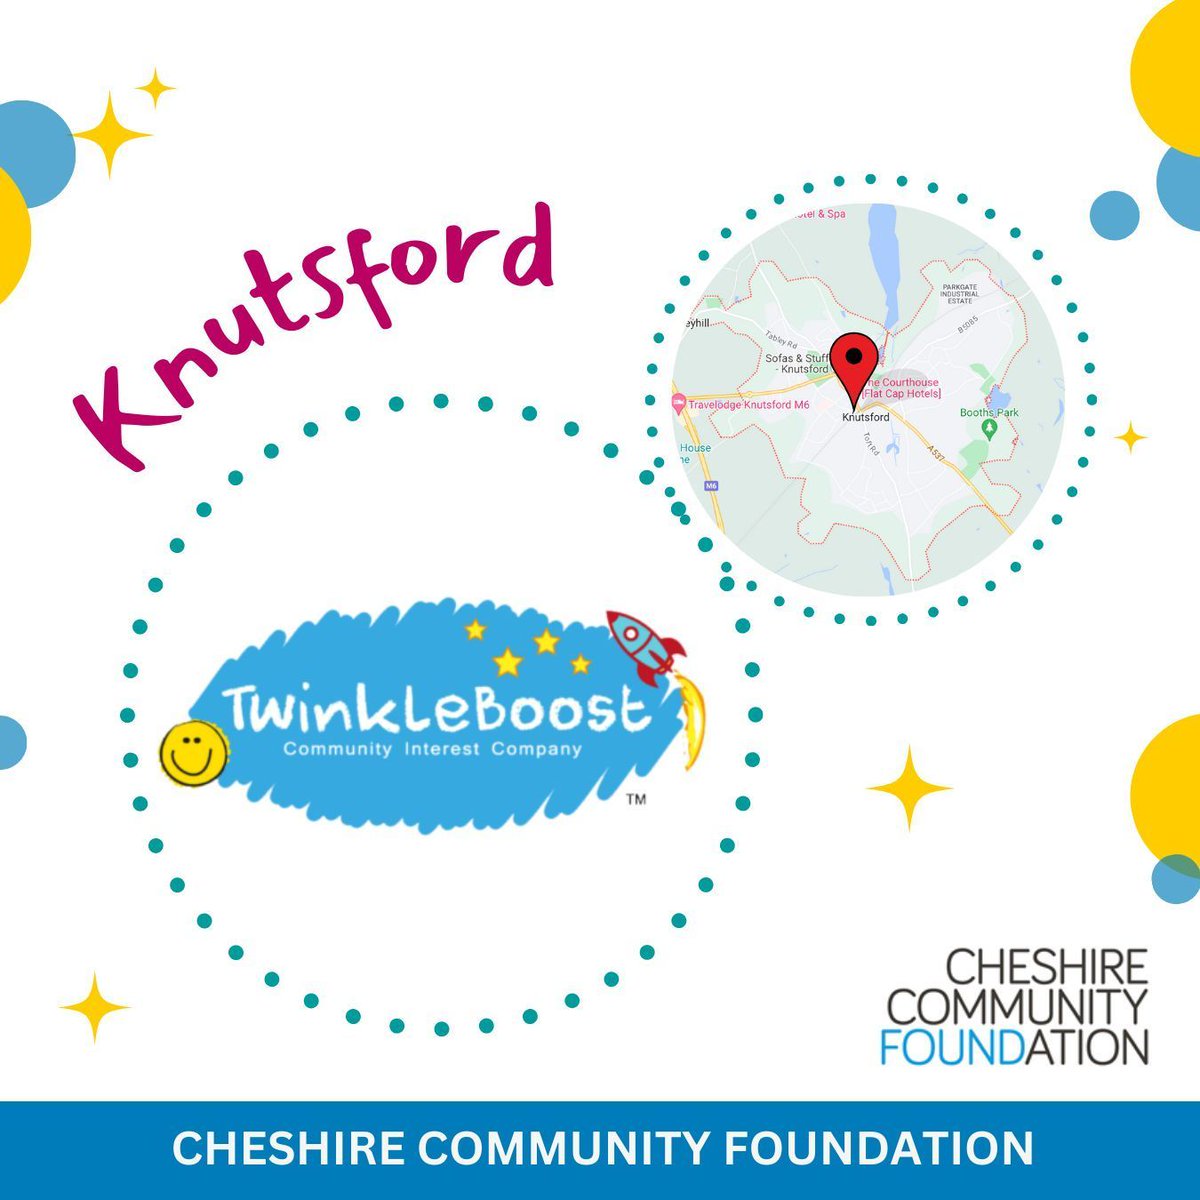 Twinkleboost CIC has secured one of our Knutsford Fund grants! They will equip new parents with the skills they need to support their child’s communication development, without the barrier of cost. Thank you @DelamereDairy and @Pastest for contributing to this grant!